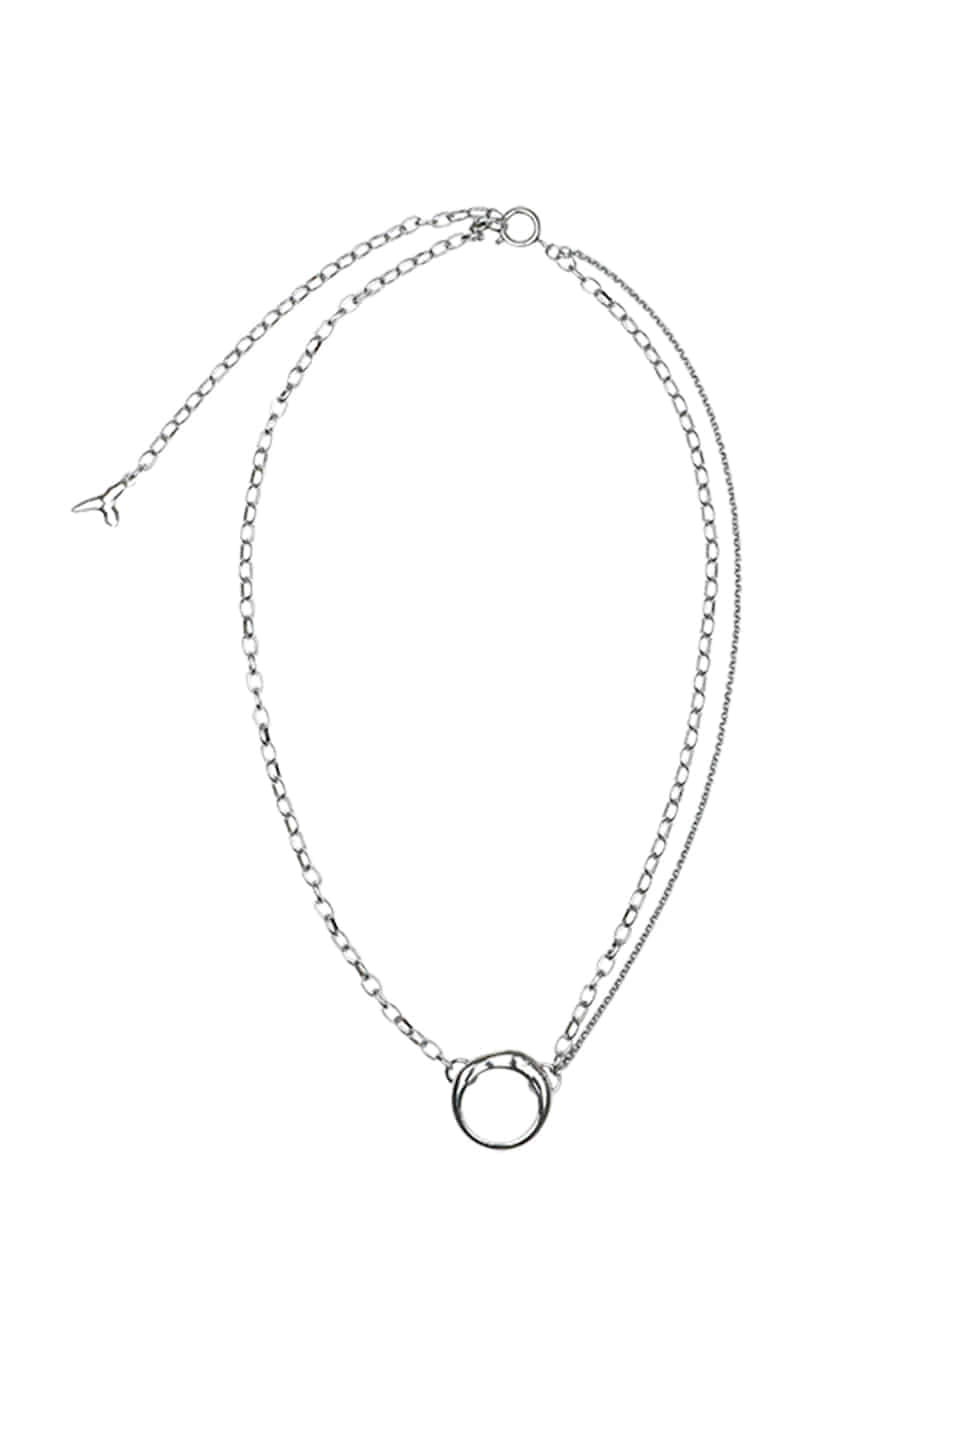 YUSE RING PENDANT CHAIN NECKLACE - SILVER